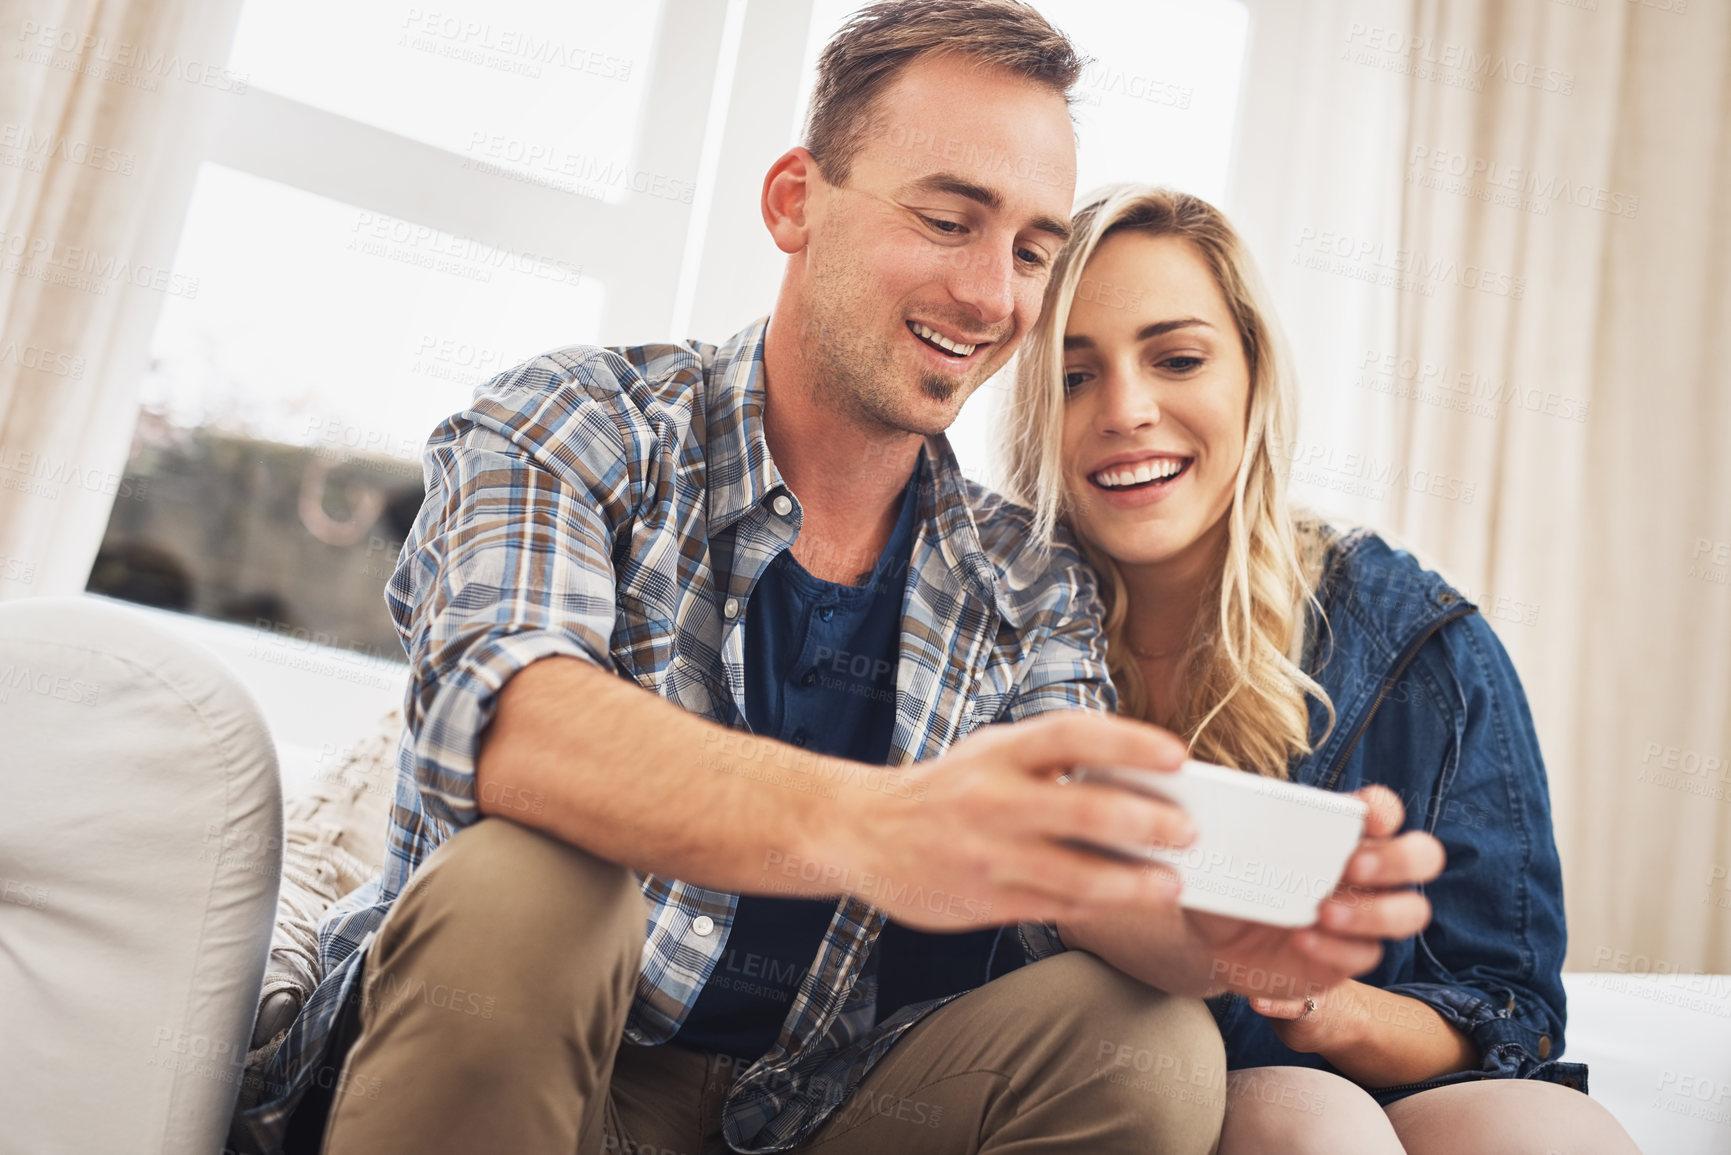 Buy stock photo Shot of a young couple using a cellphone at home